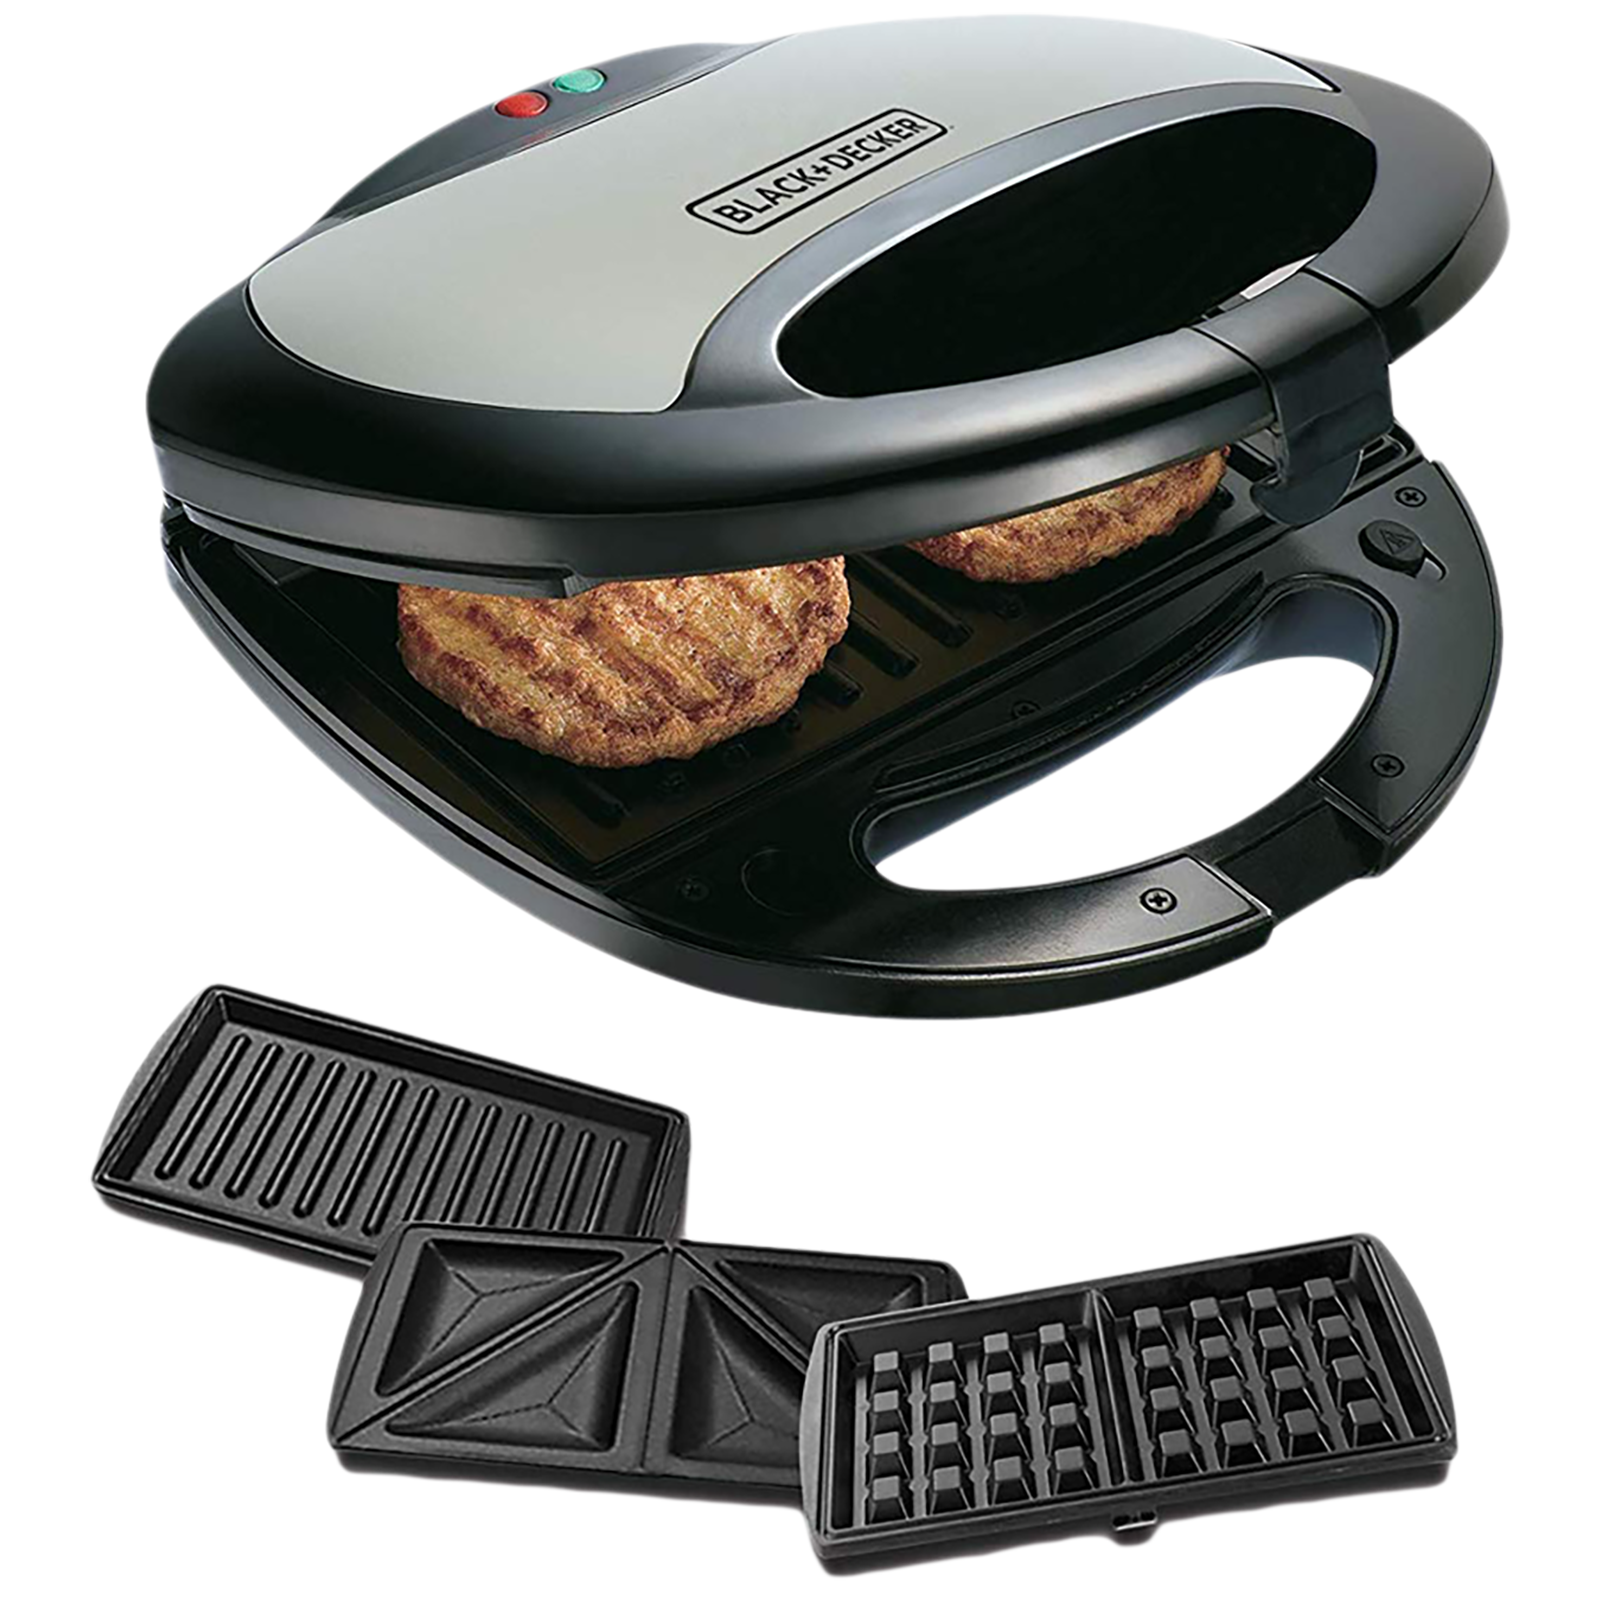 https://media.croma.com/image/upload/v1691675575/Croma%20Assets/Small%20Appliances/Toasters%20Sandwich%20Makers/Images/218044_10_d6g72z.png